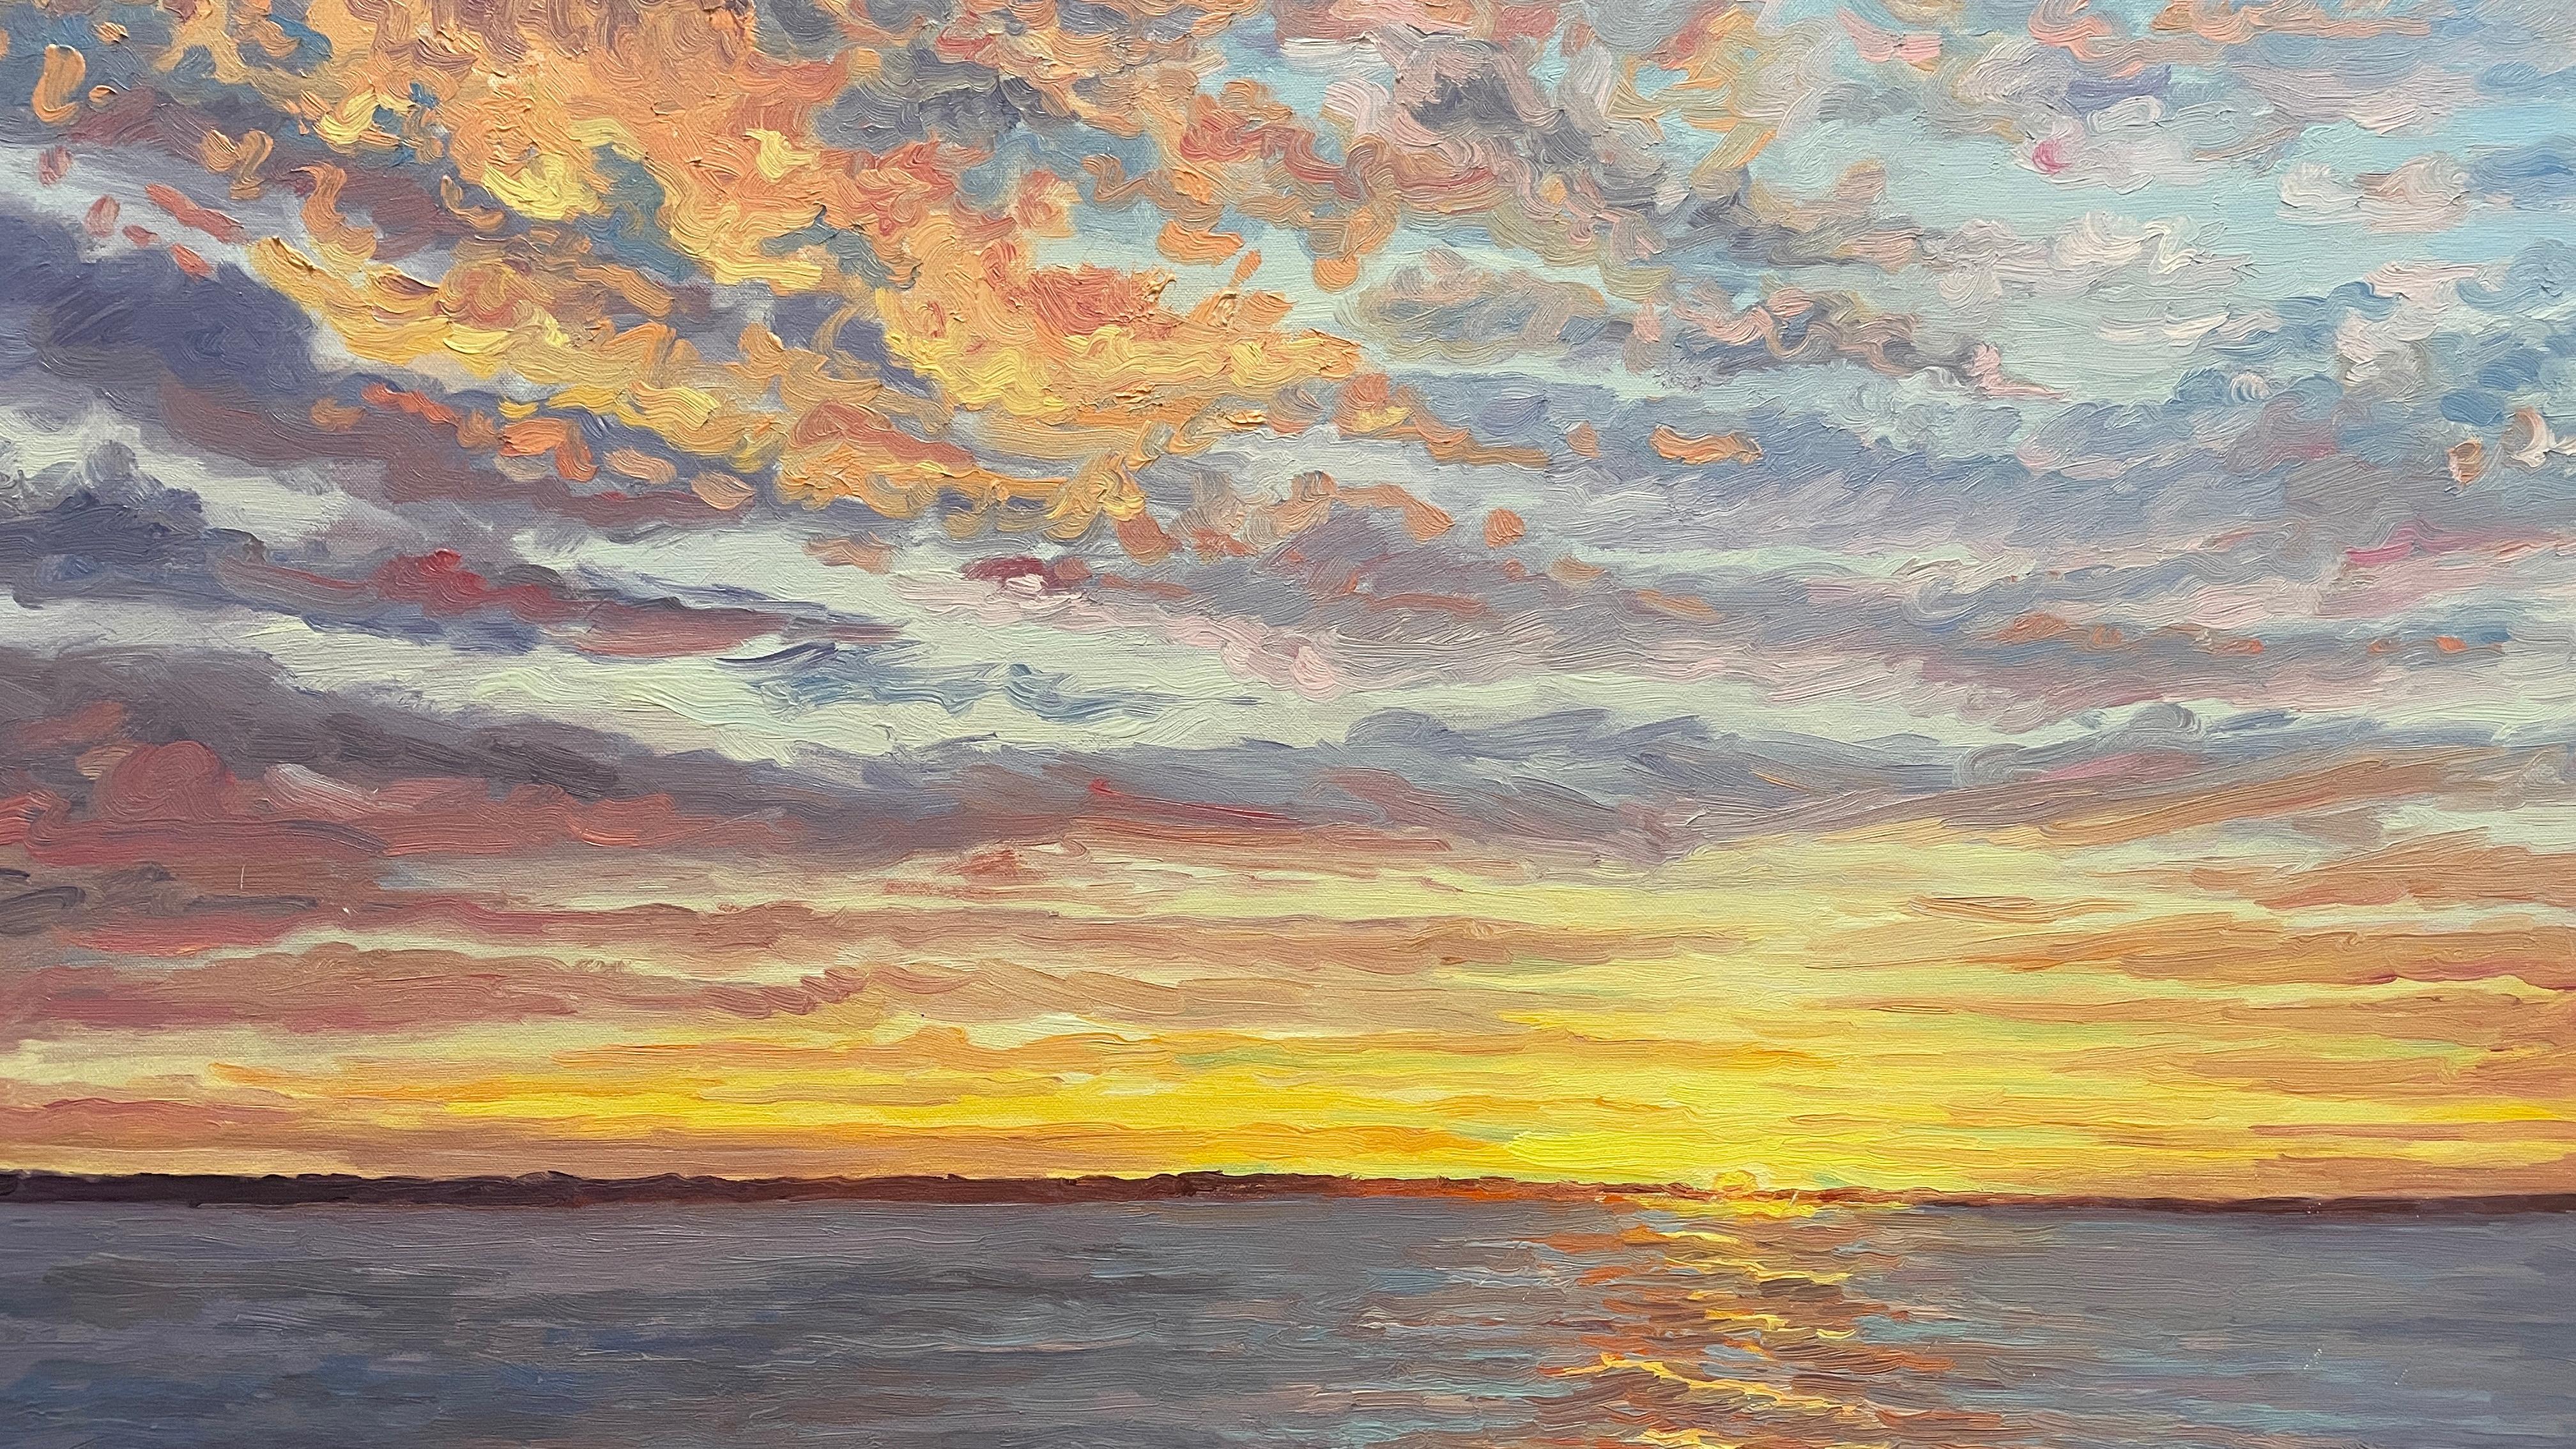 Nature's Glory at End of Day. Title - Sunset over Gardiners Bay - Painting by Carl Scorza